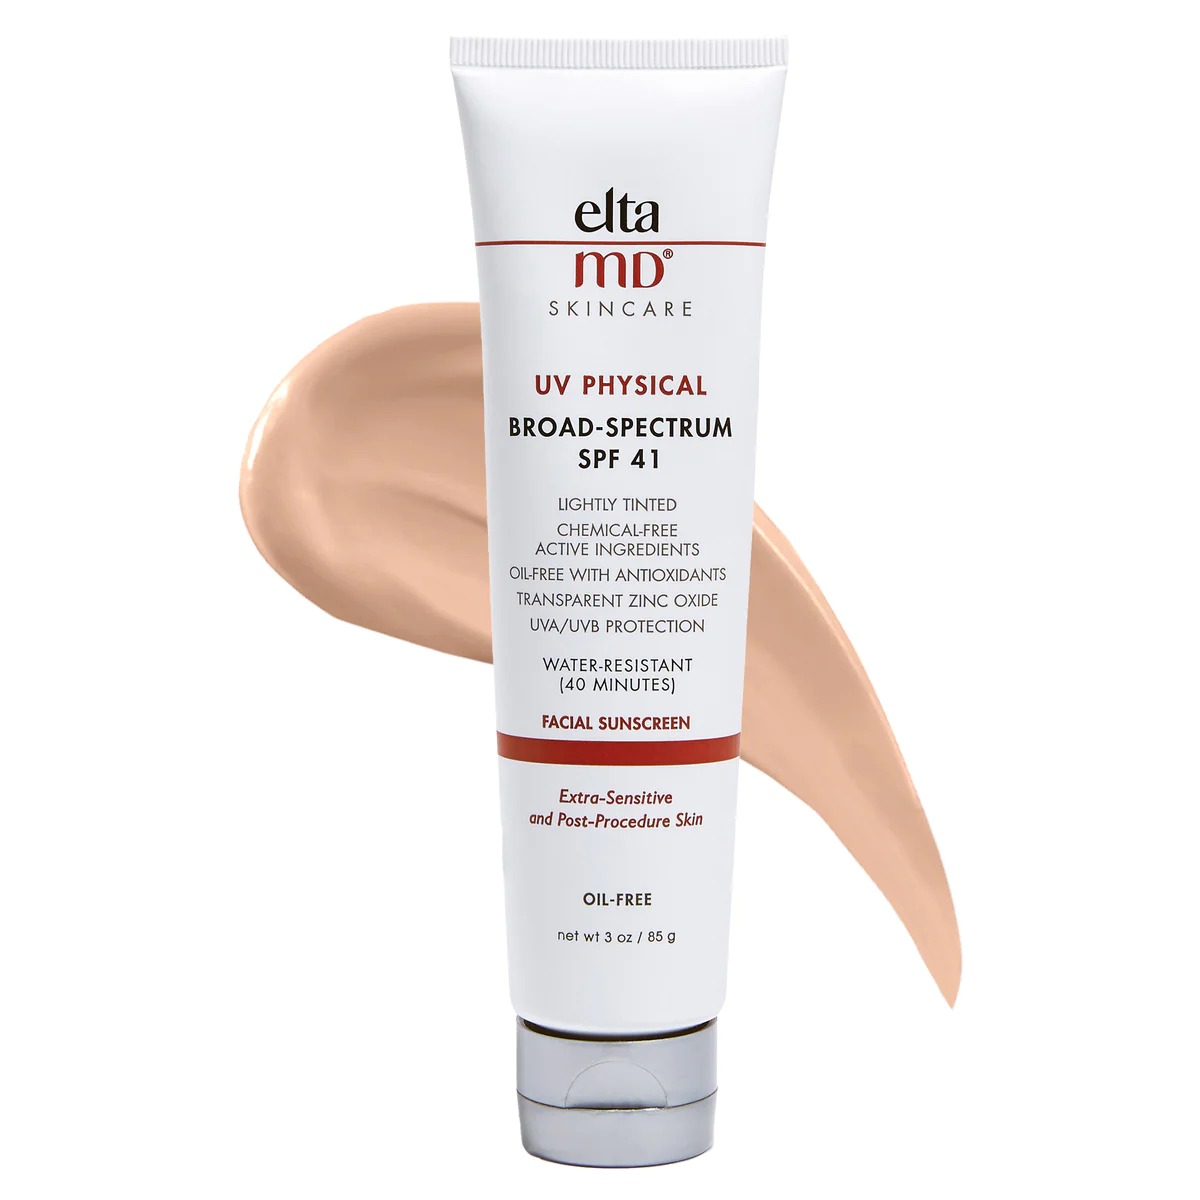 FEMMENORDIC's choice in the Elta MD UV Elements vs UV Physical sunscreen comparison, the Elta MD UV Physical Facial Sunscreen